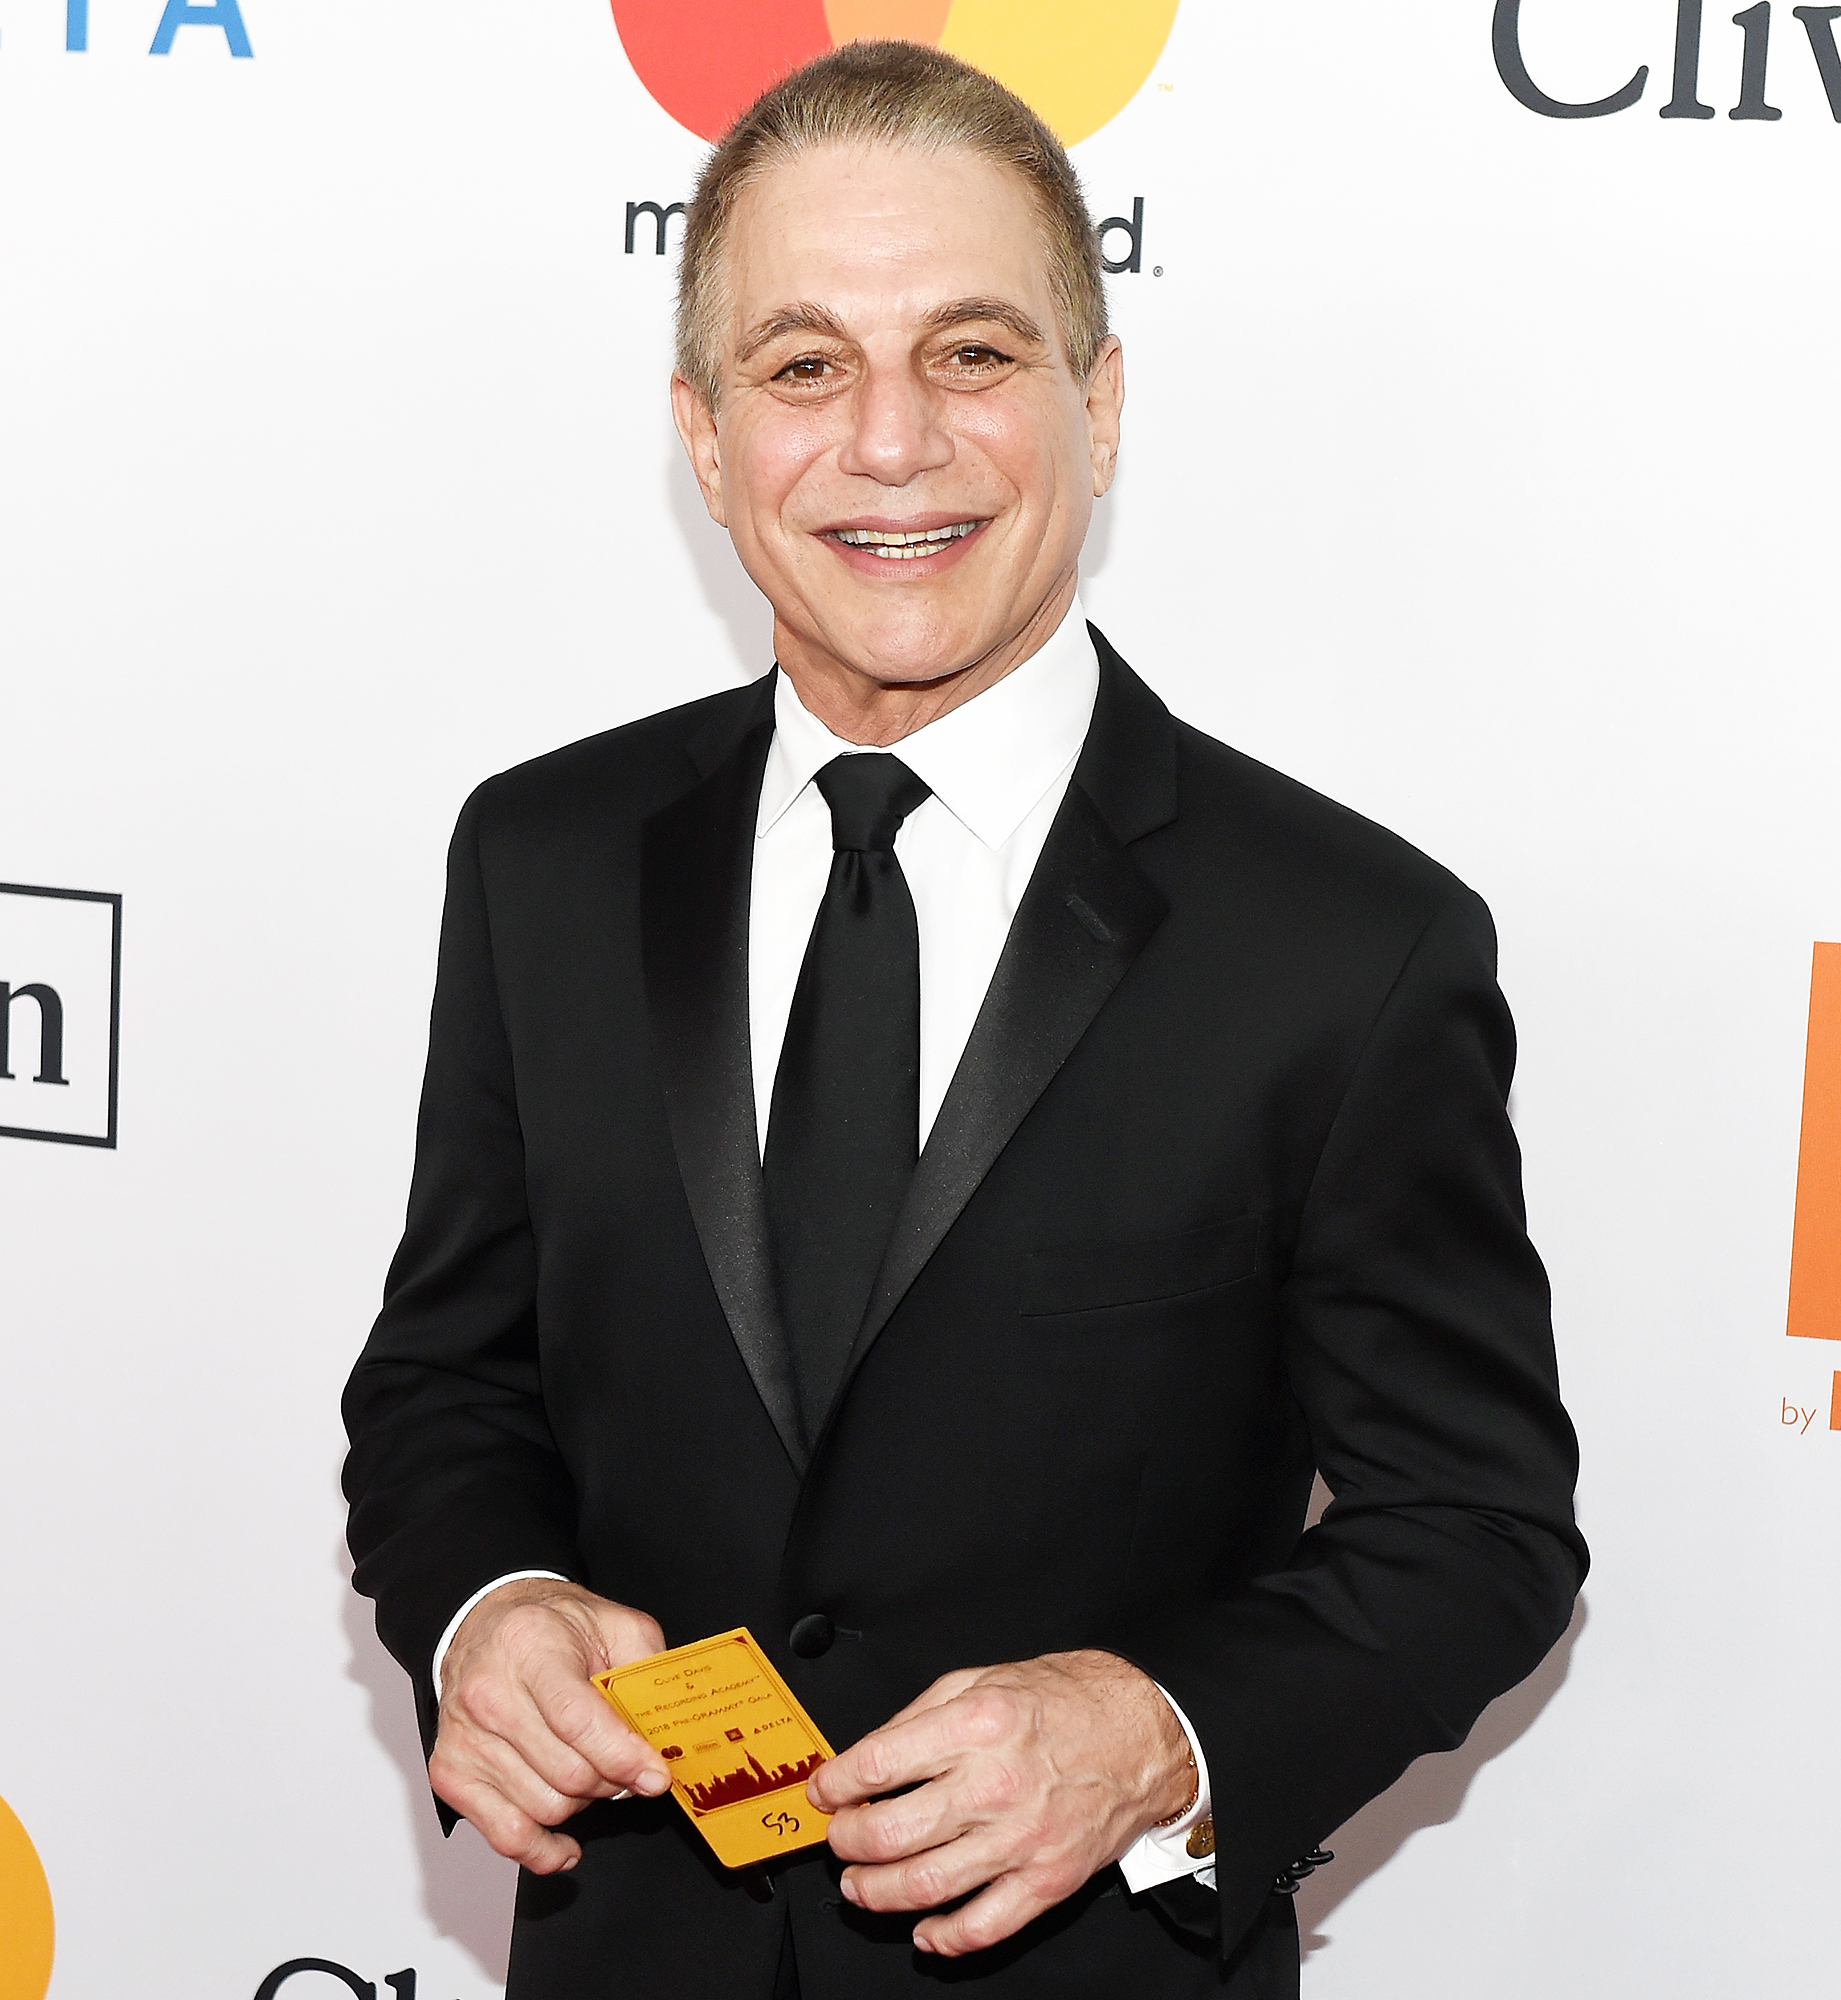 Tony Danza Reveals What Hollywood Adventure Changed His Life